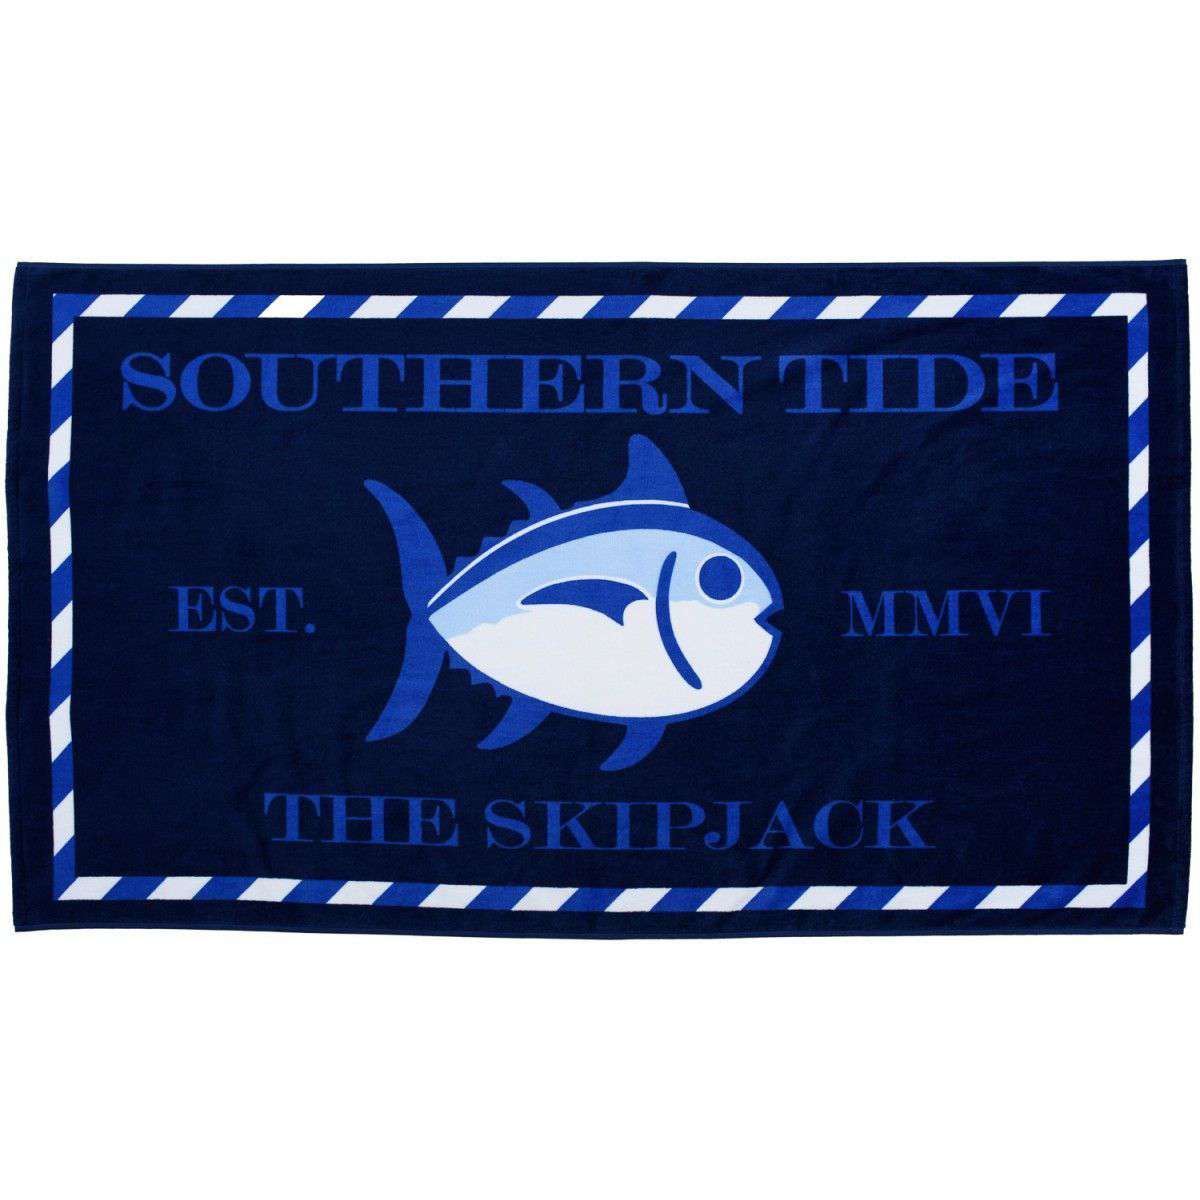 Skipjack Beach Towel in Yacht Blue by Southern Tide - Country Club Prep